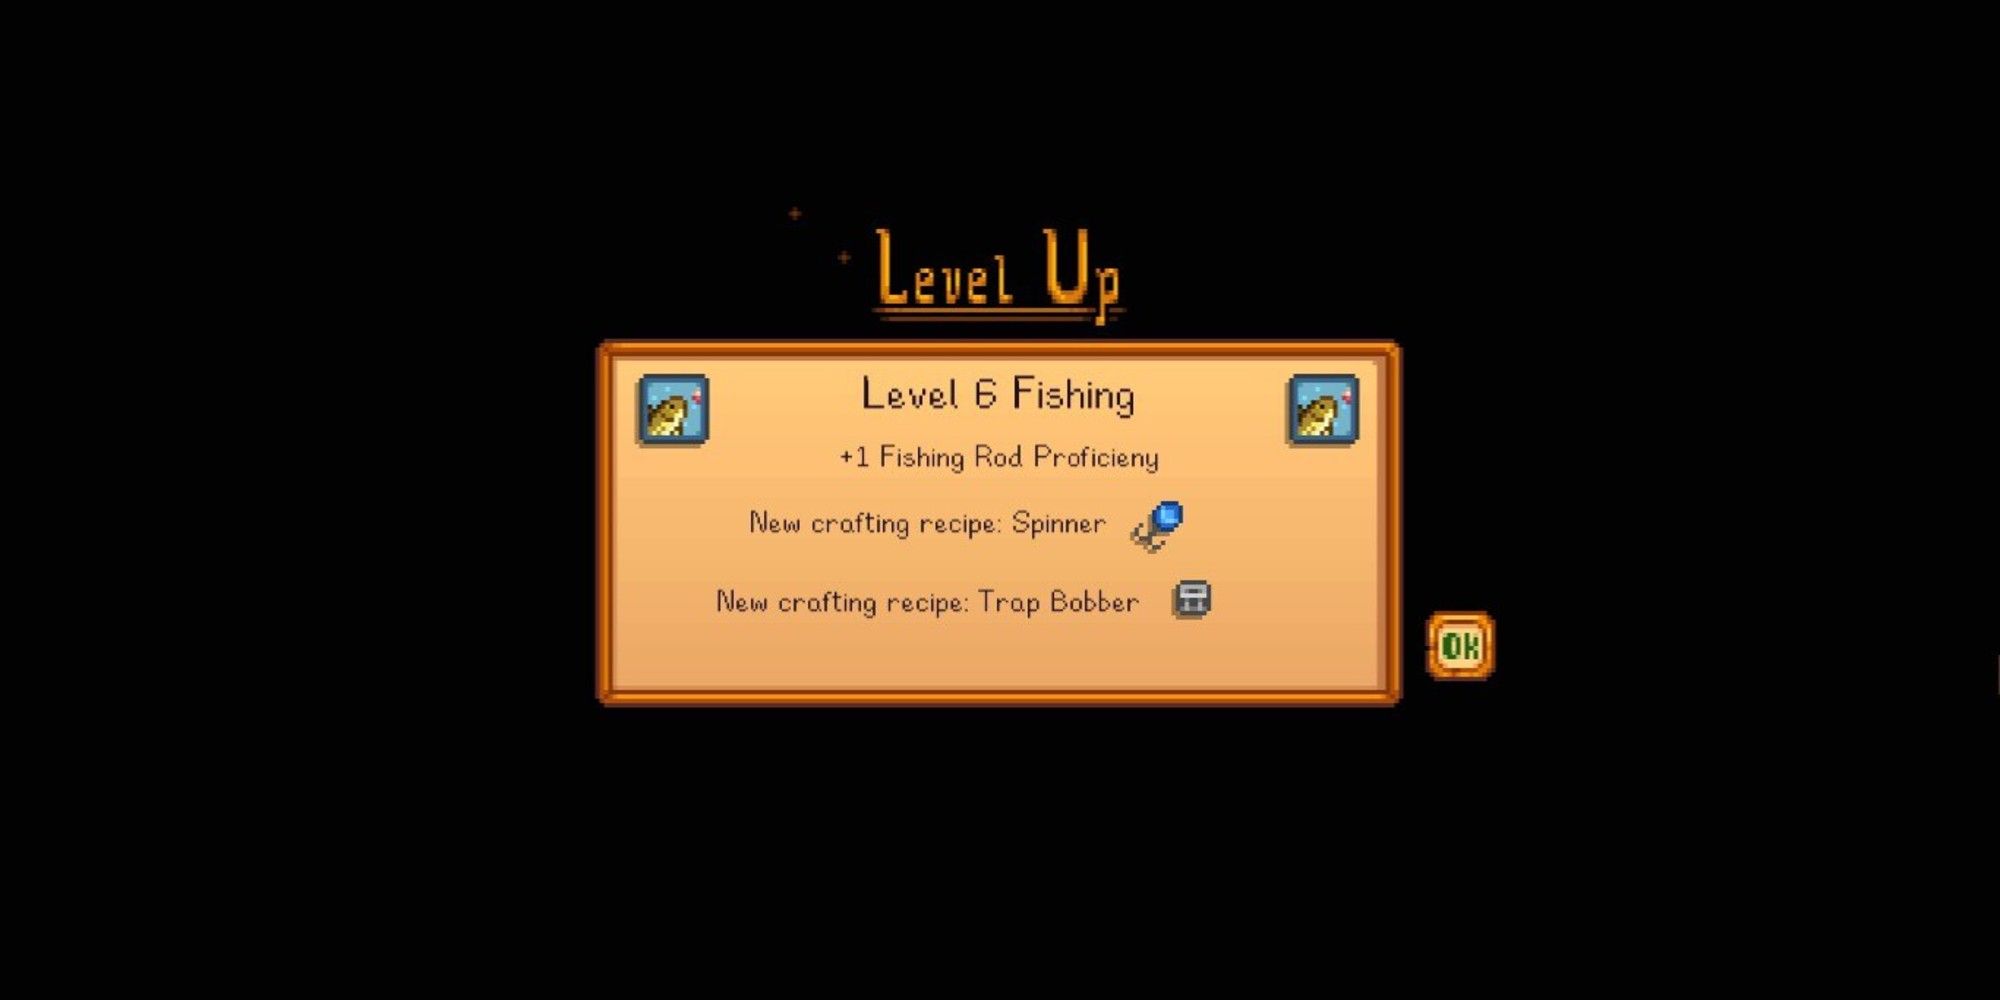 leveling up screen for level 6 fishing